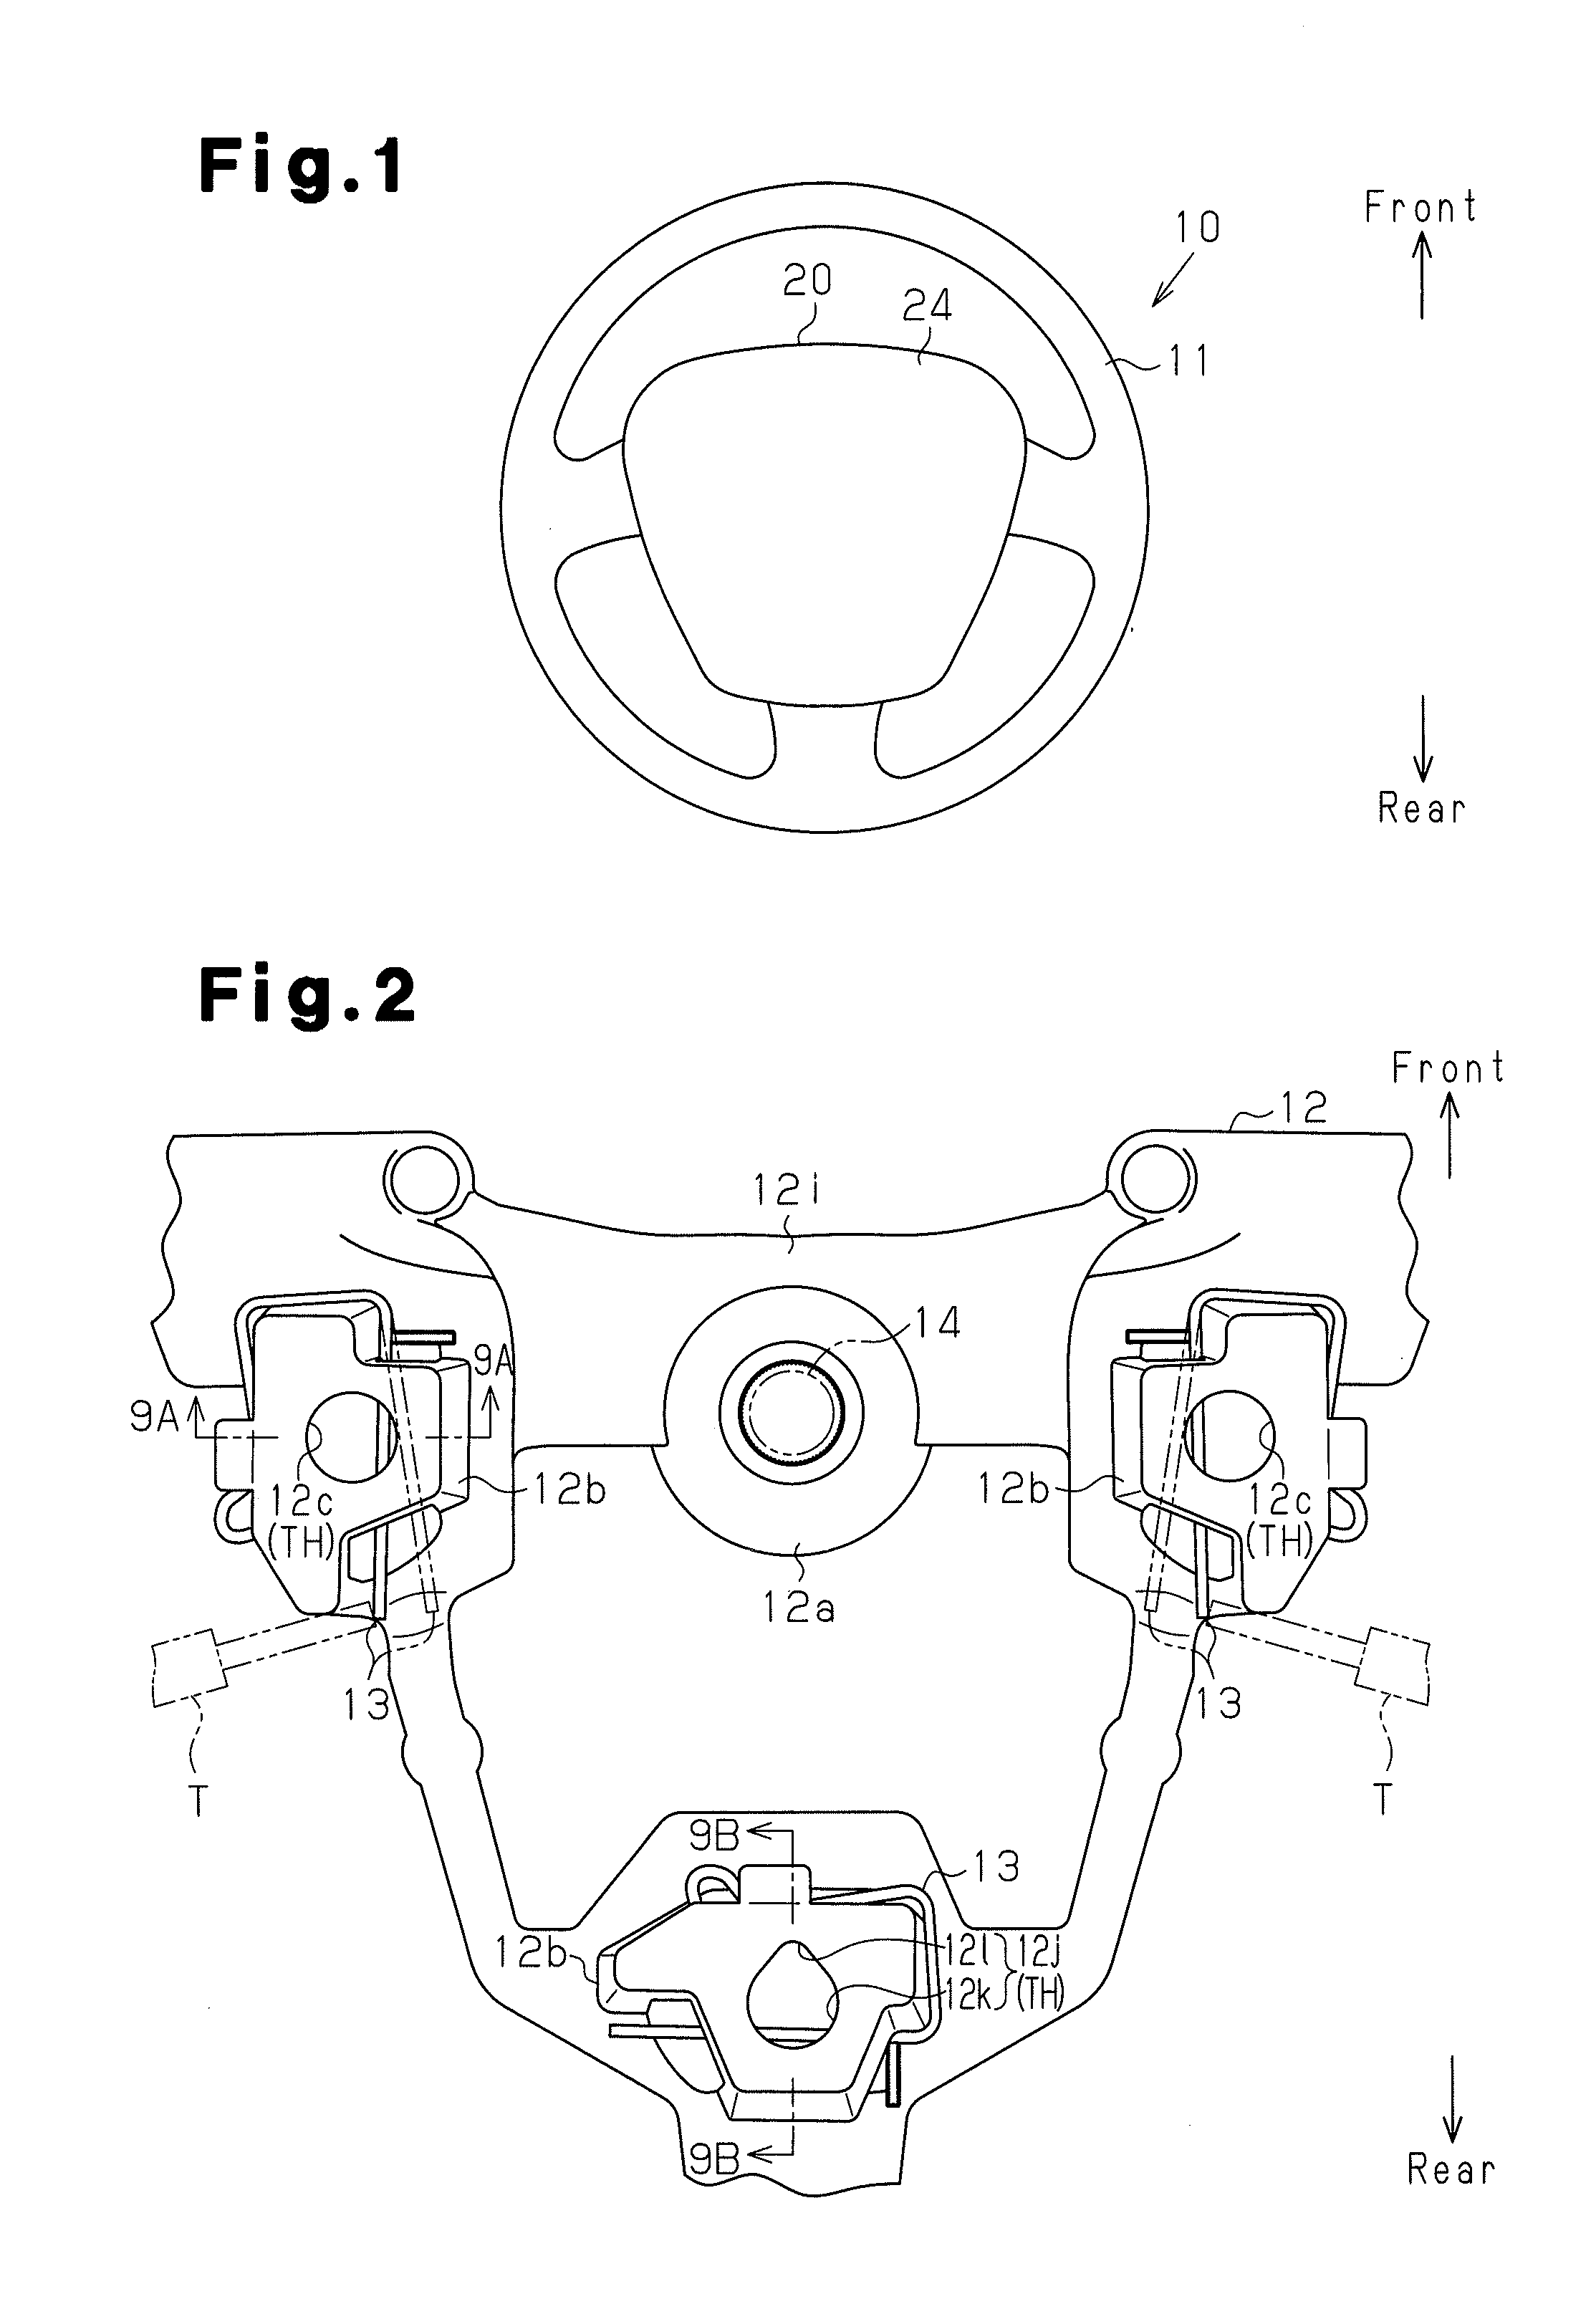 Airbag-equipped steering wheel device